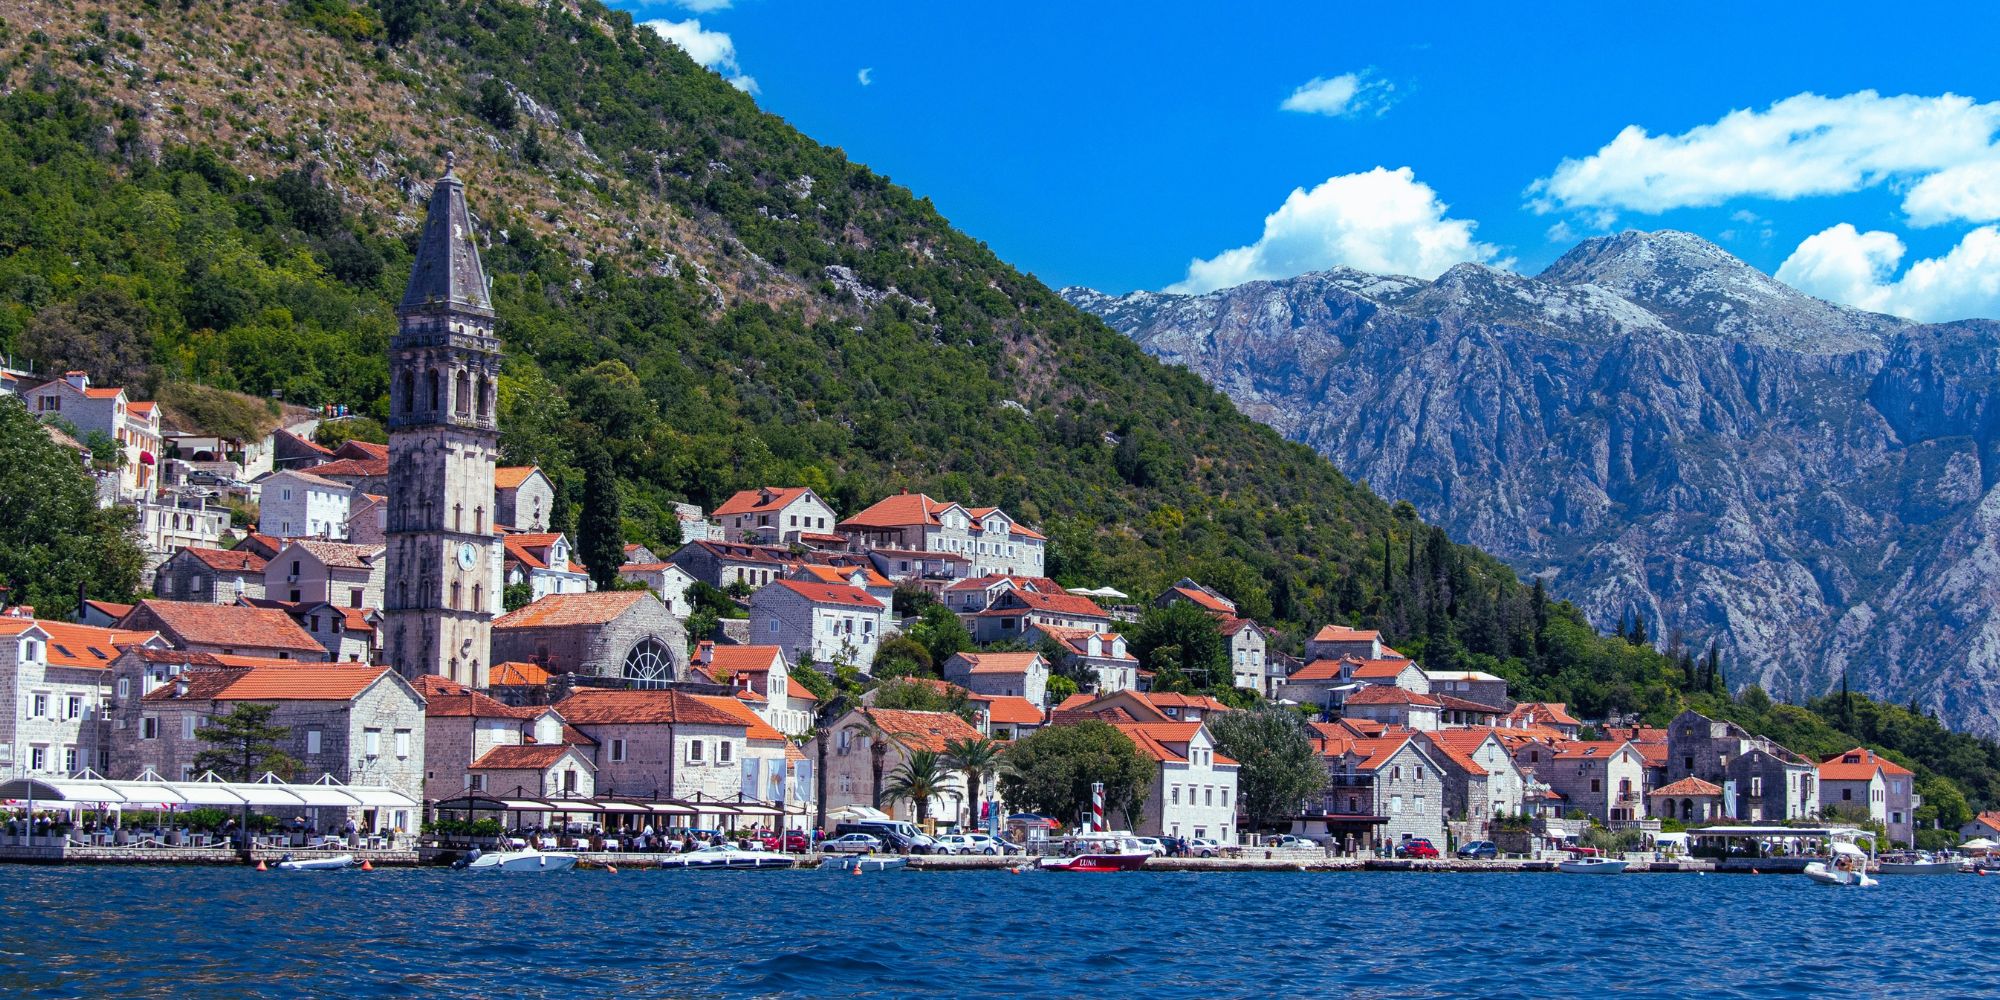 Power Plugs and Outlets in Montenegro